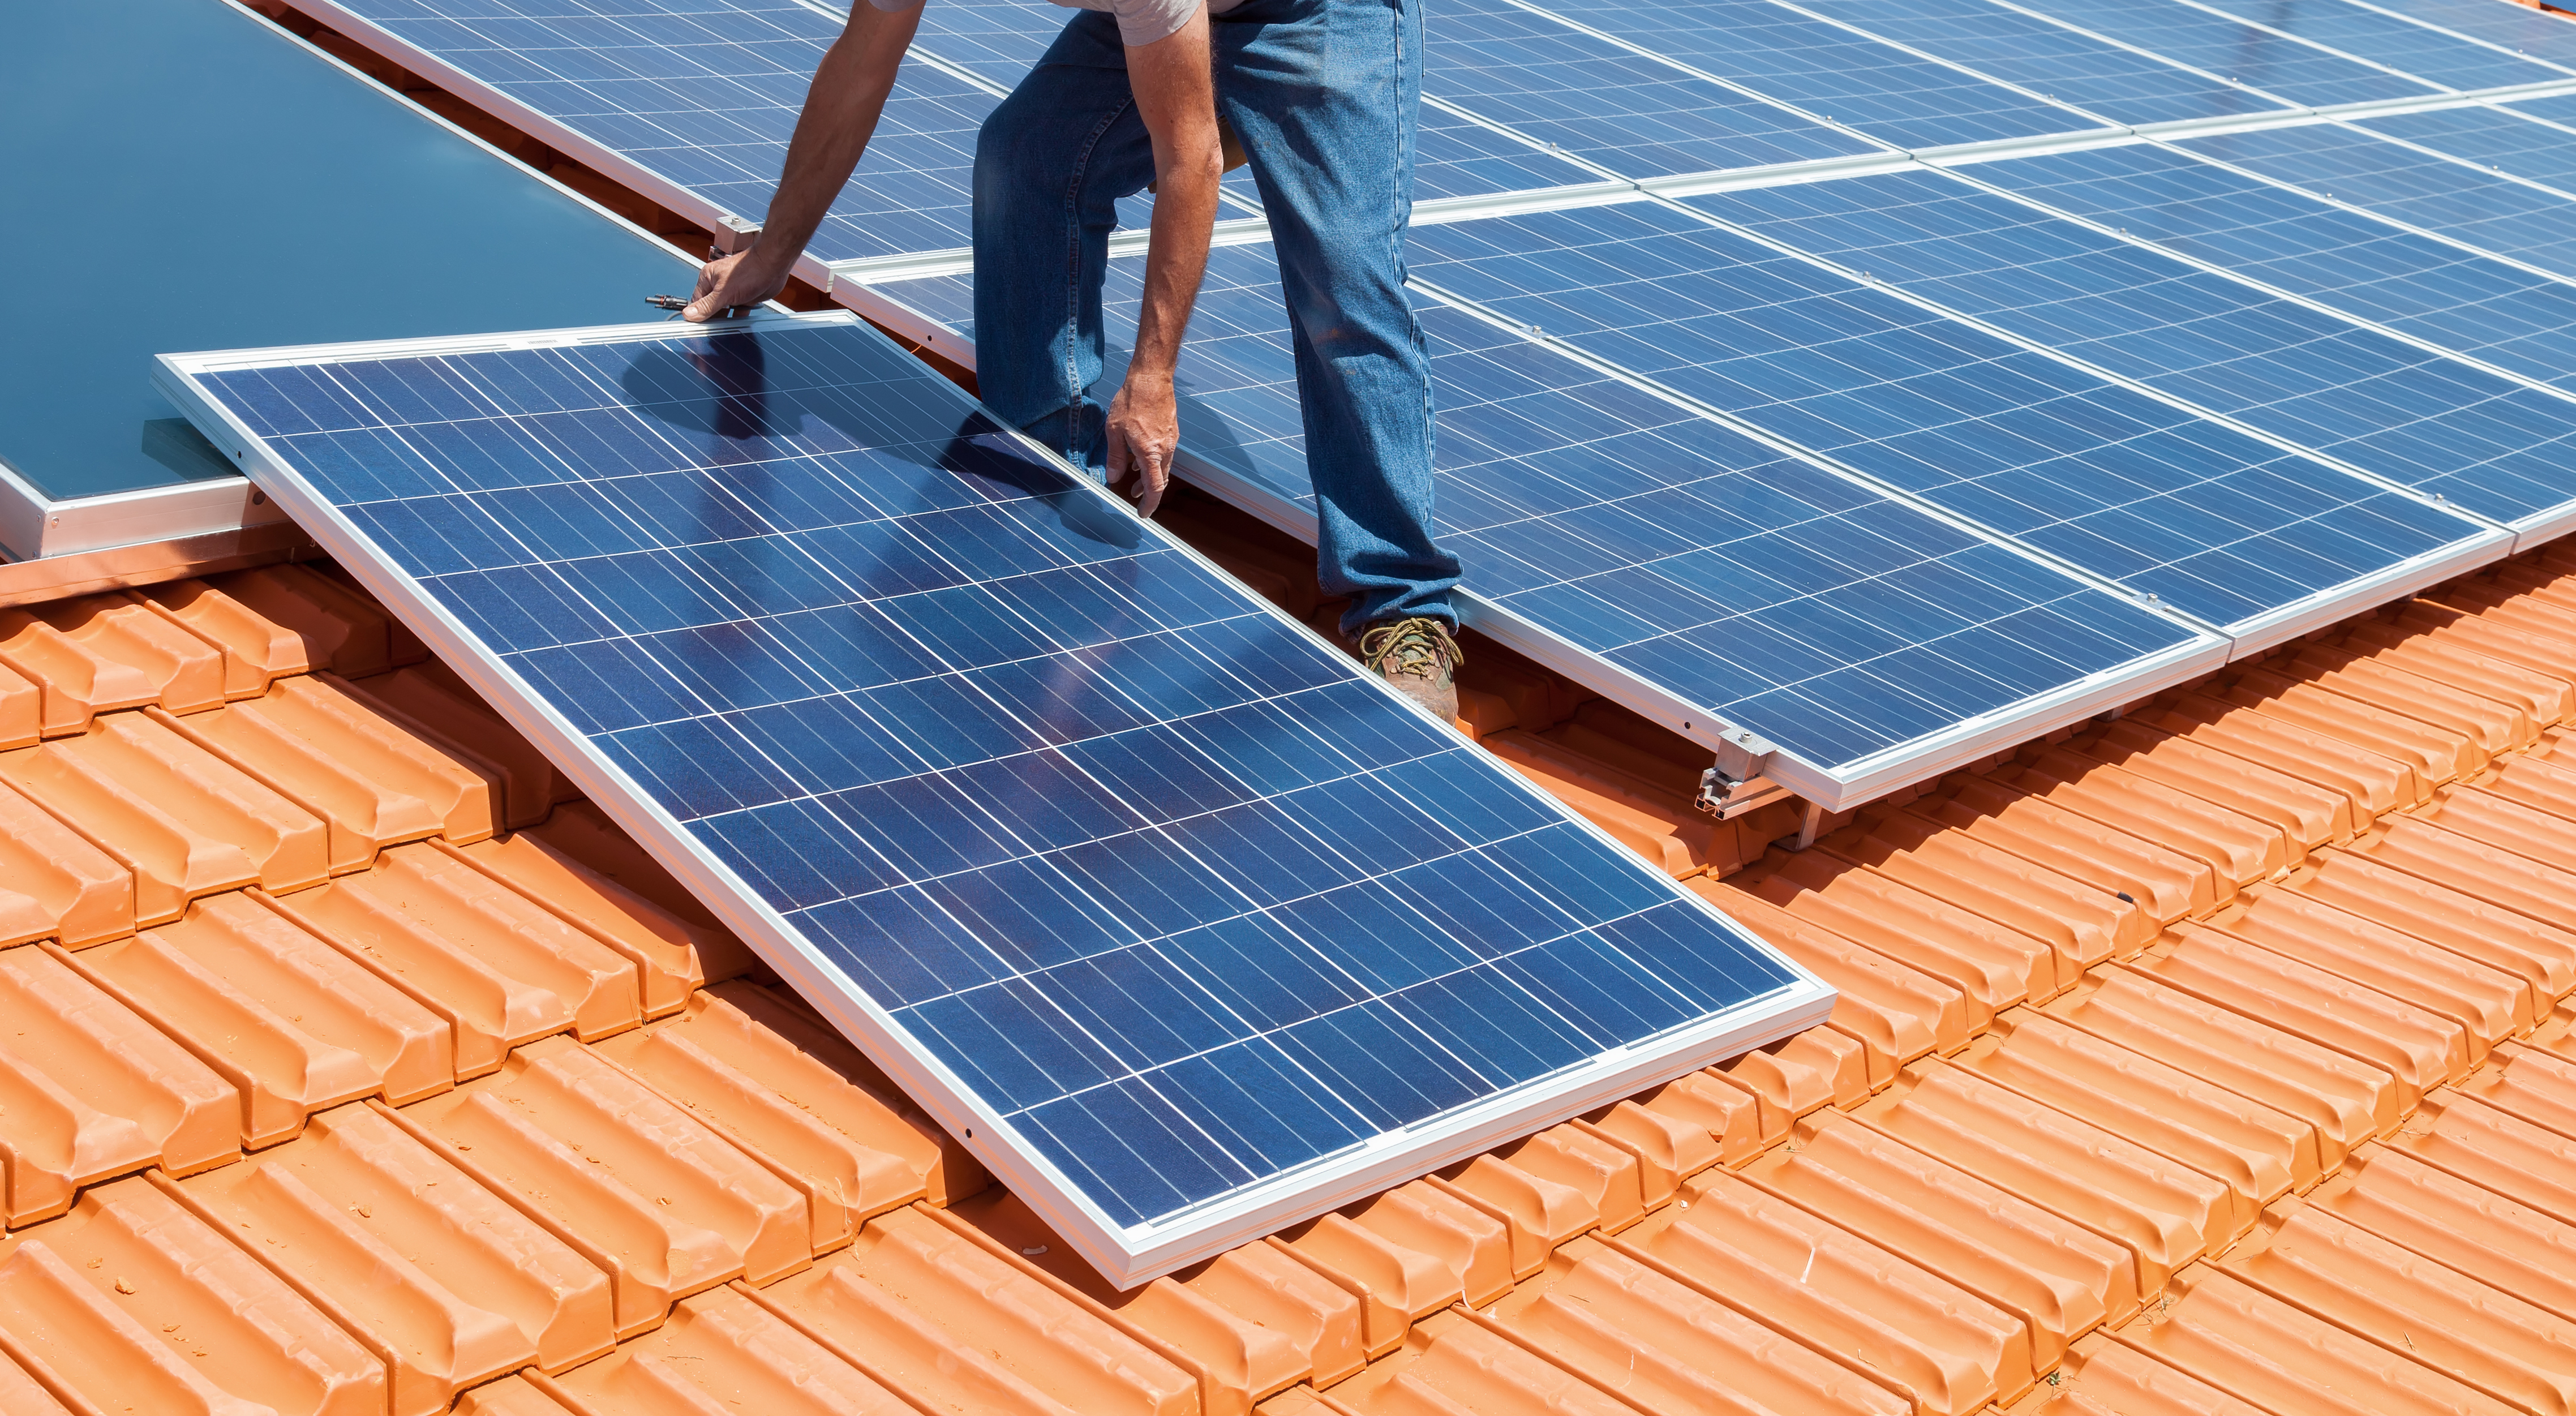 HOW TO BUY THE BEST SOLAR POWER SYSTEM FOR YOUR HOME?